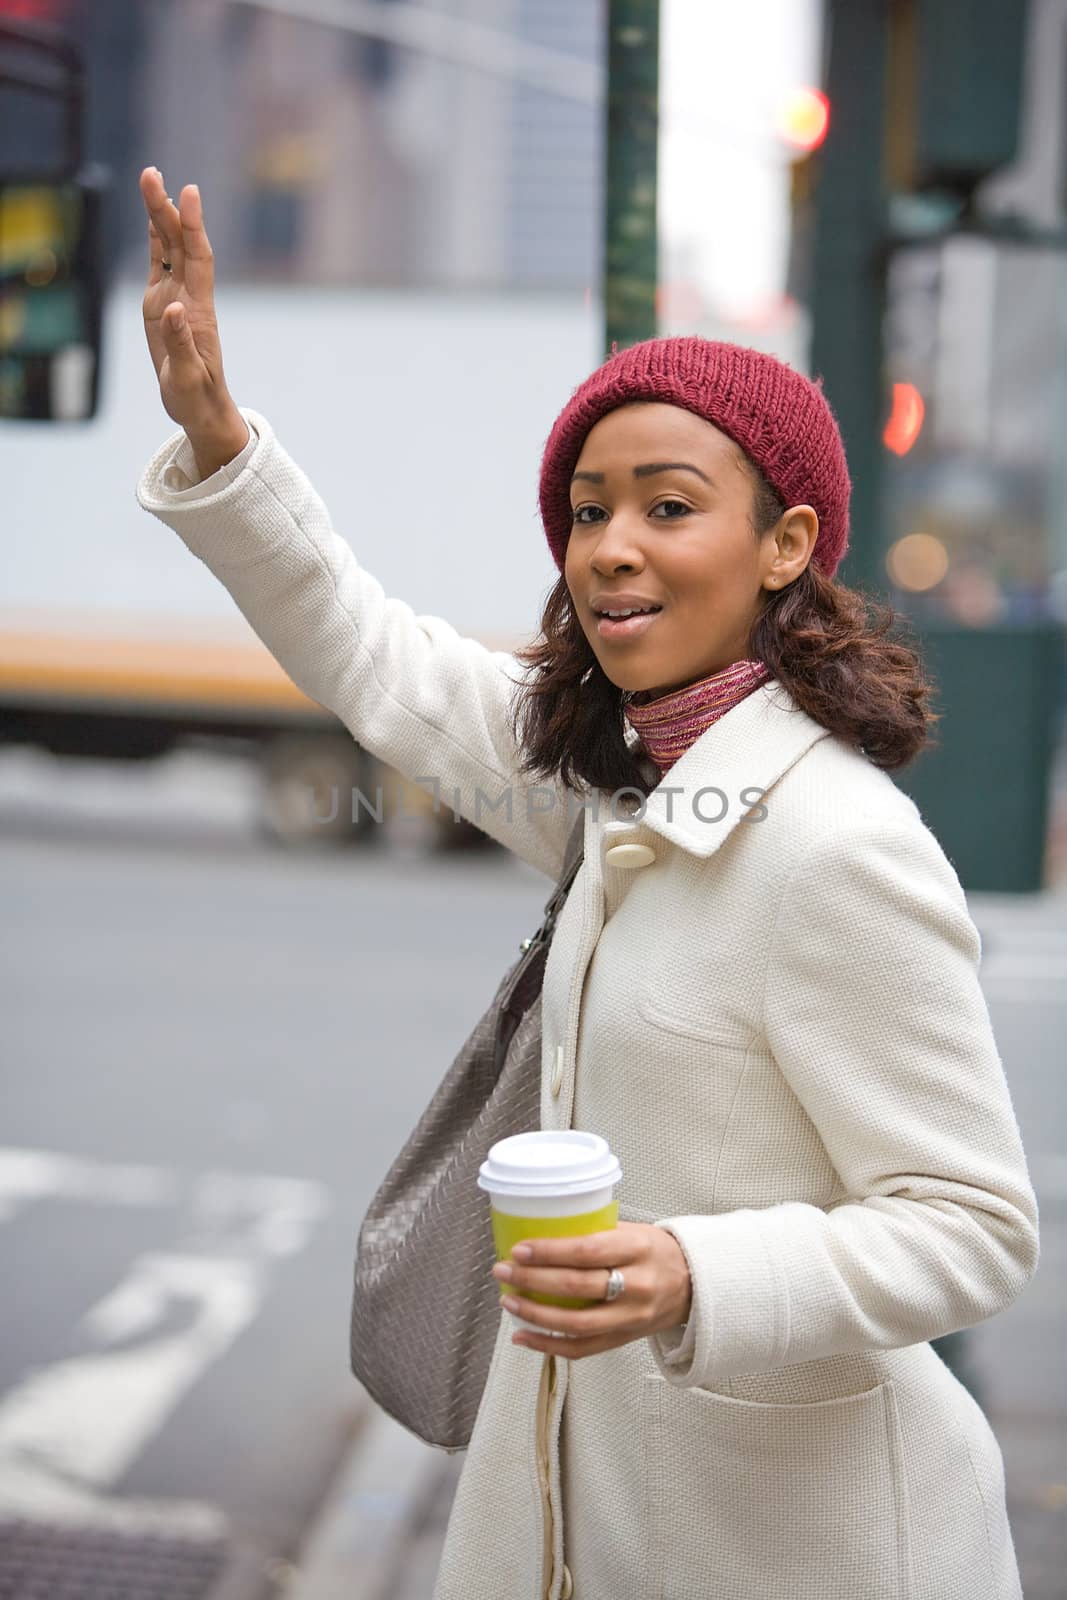 Woman Hailing A Cab by graficallyminded